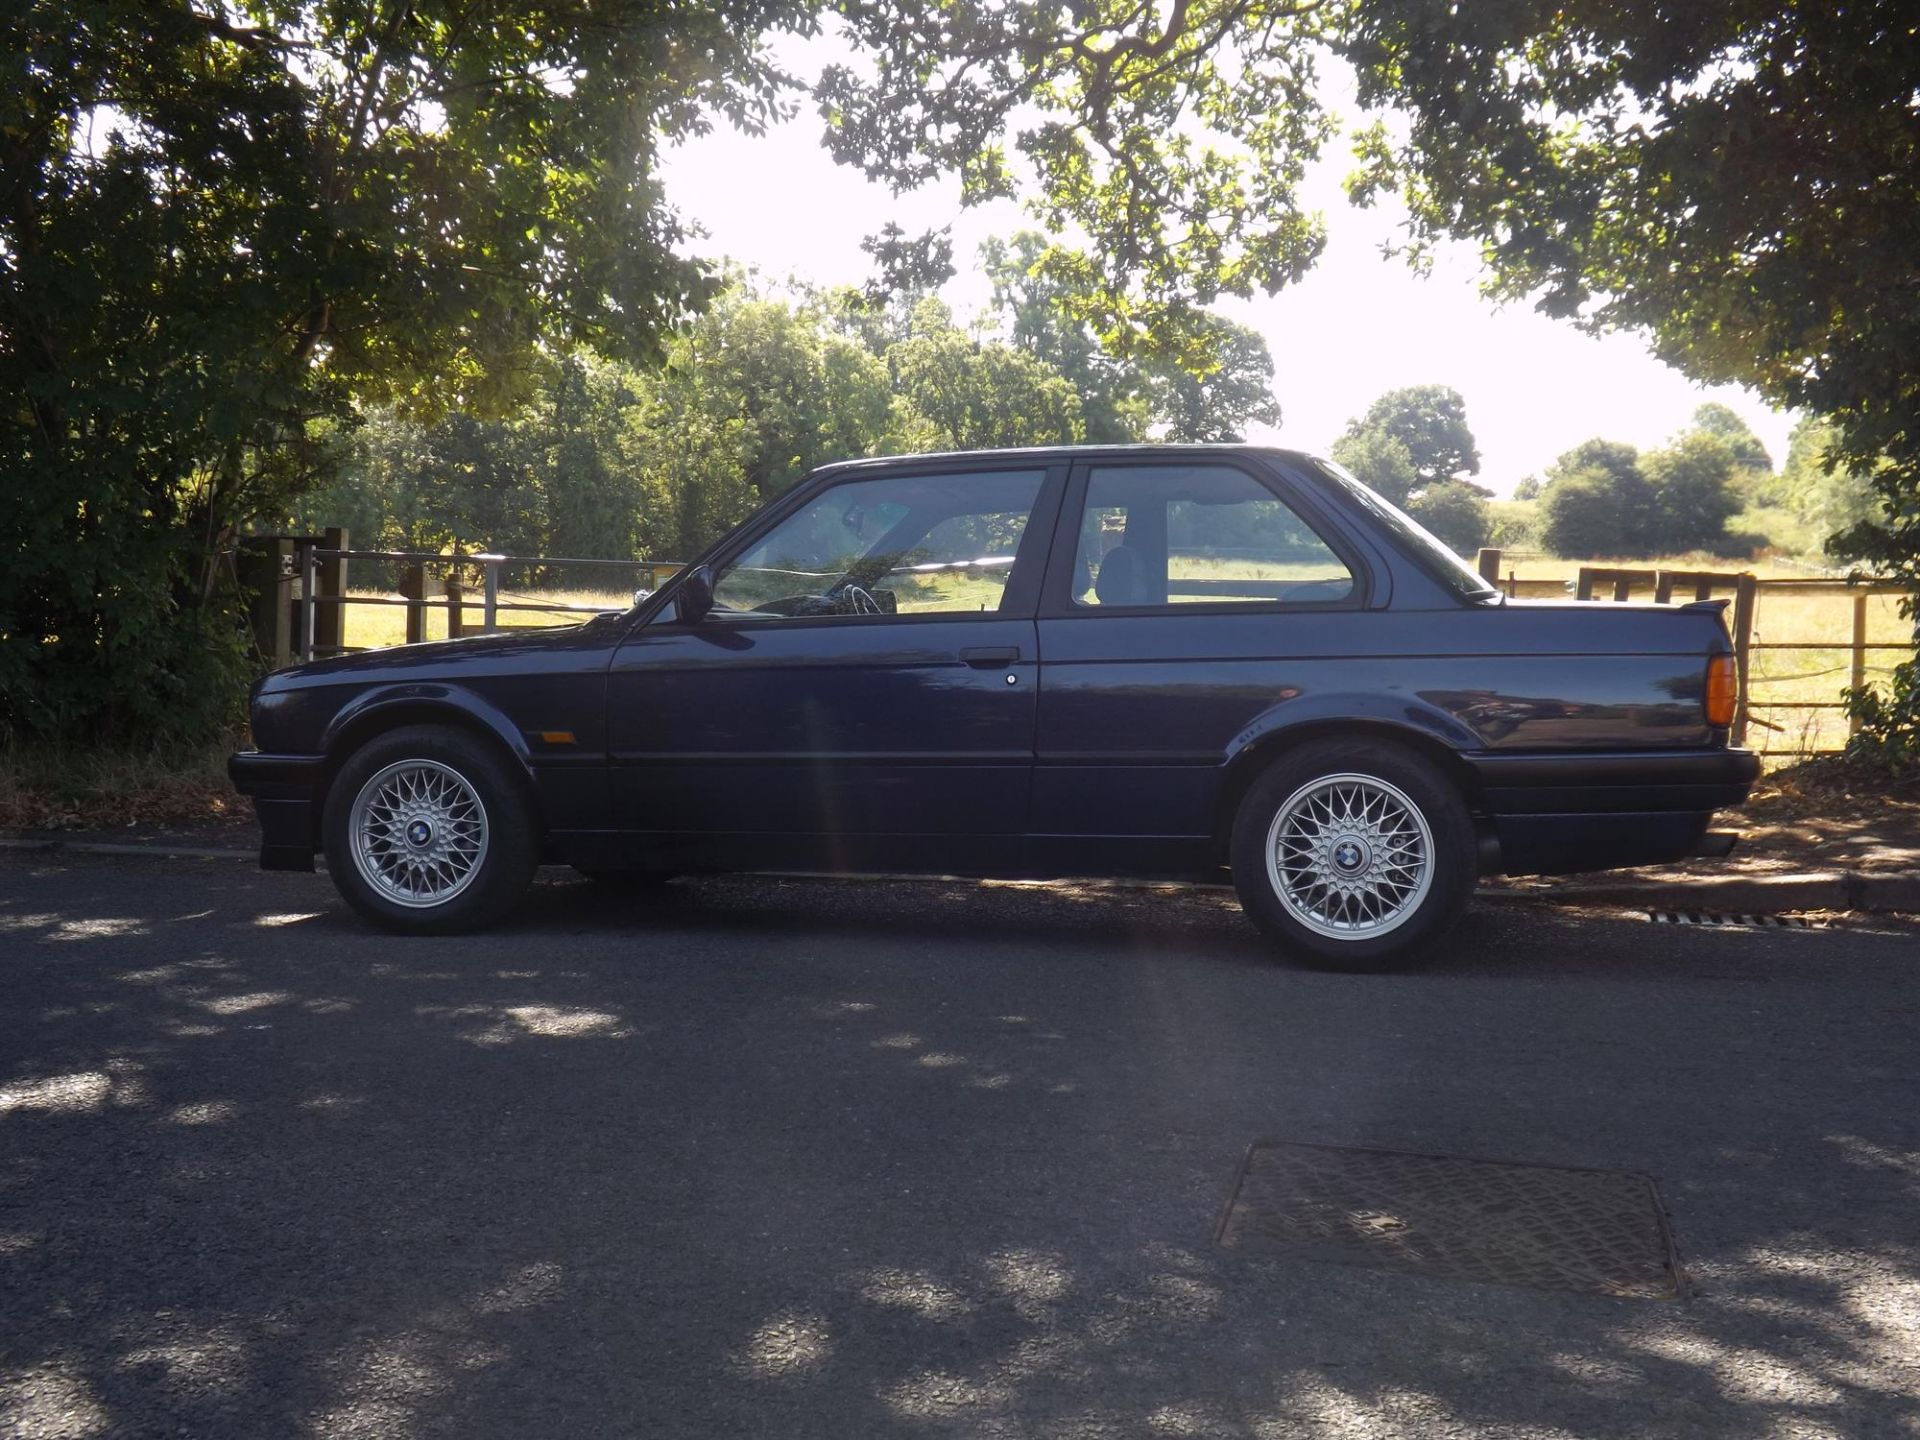 1990 BMW 318is Coupé (E30) - Image 5 of 10